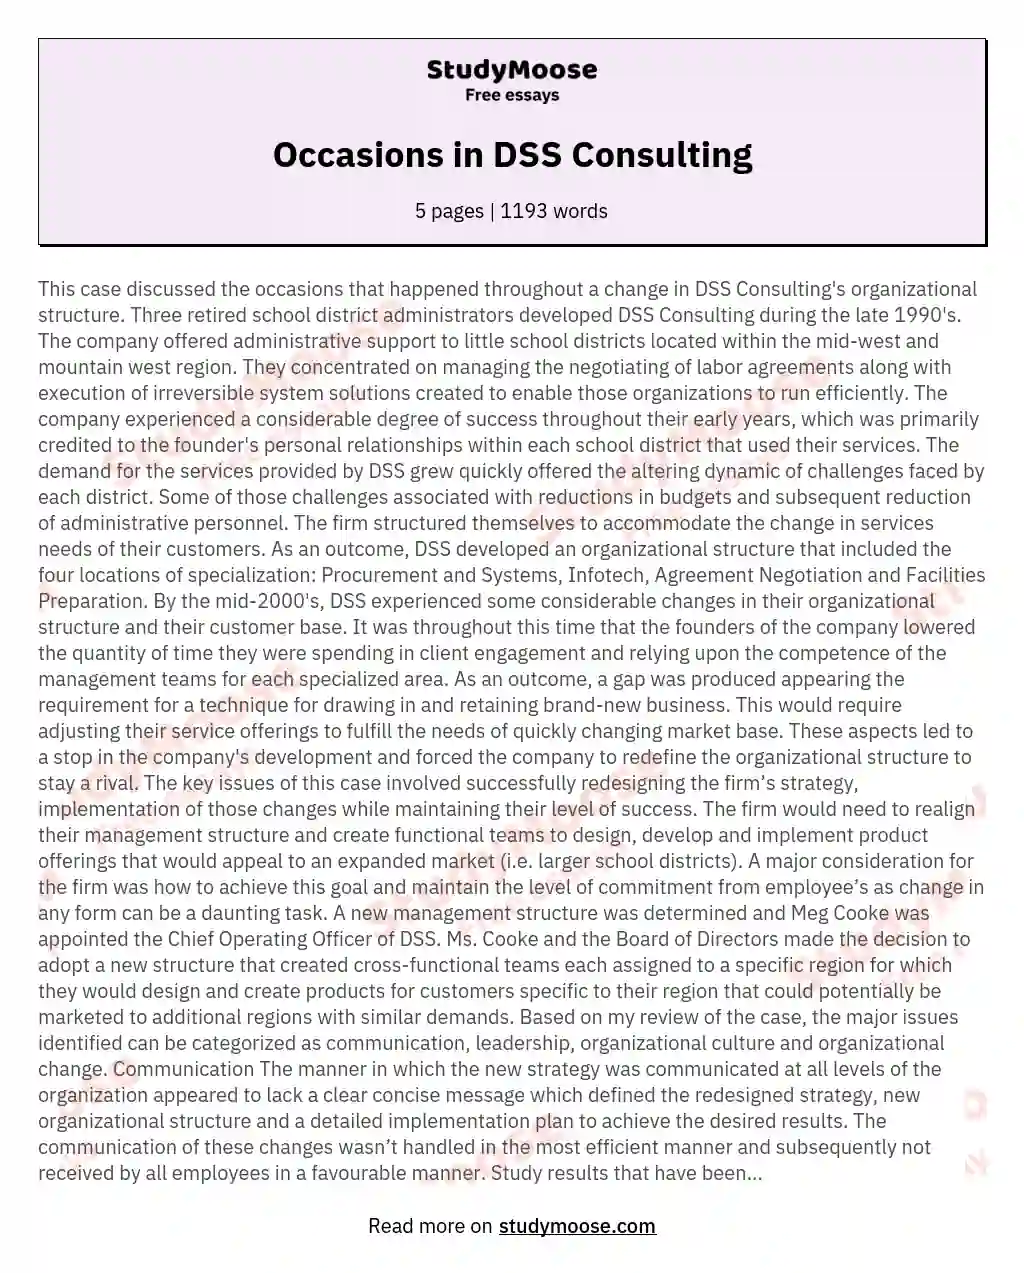 Occasions in DSS Consulting essay